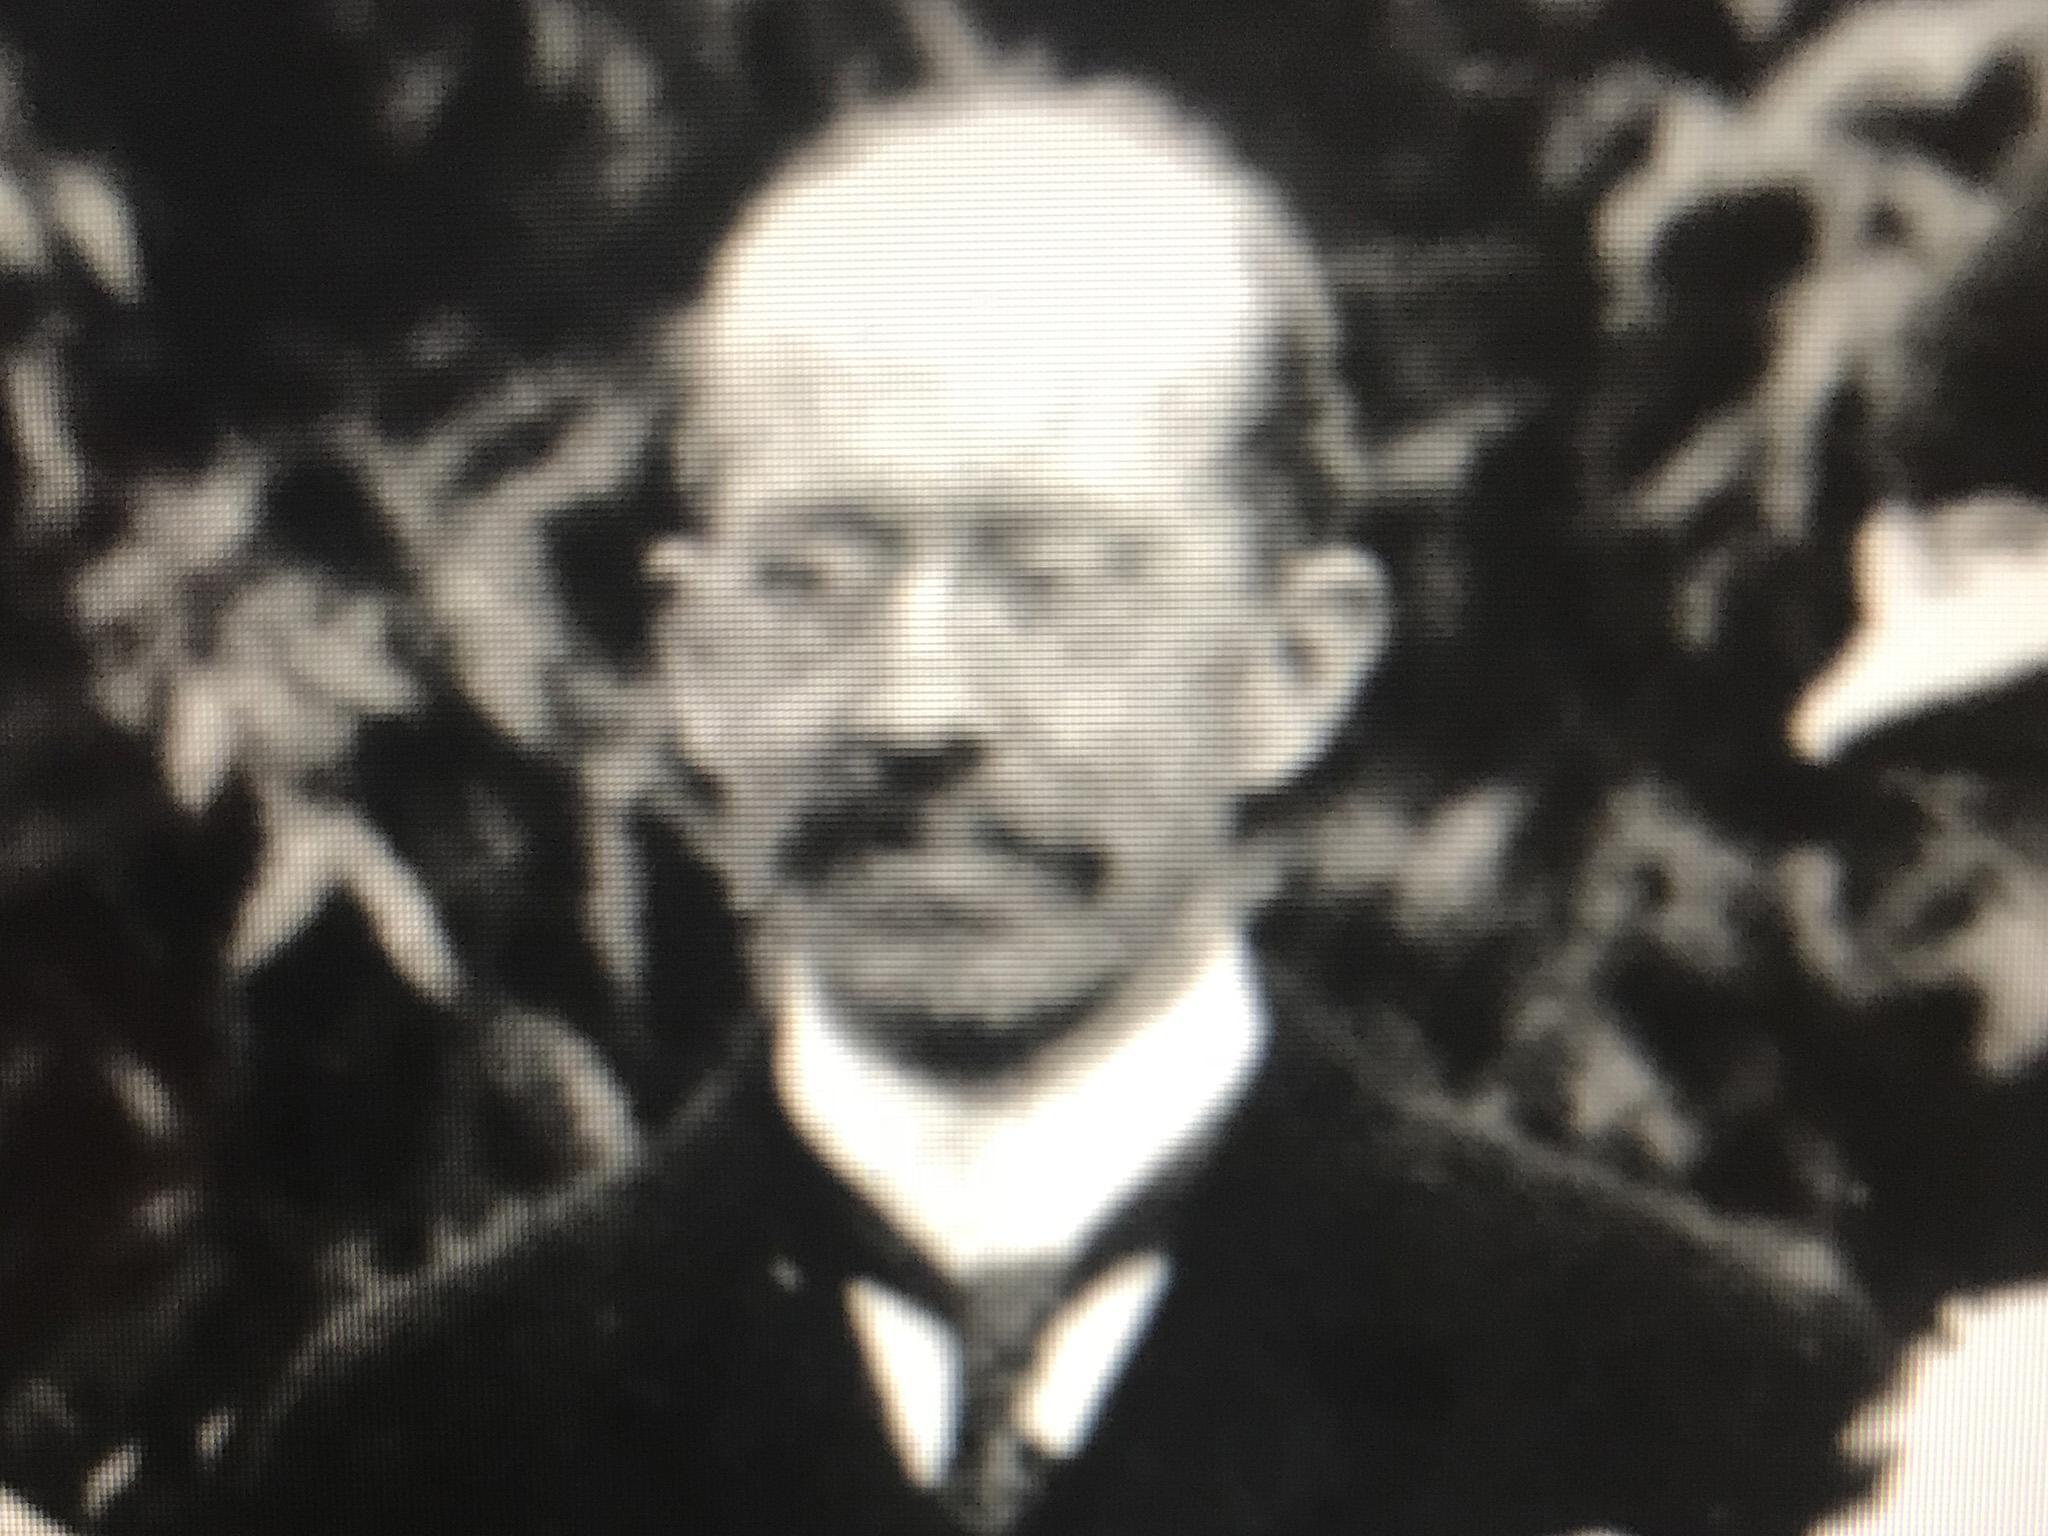 Henry Cockburn, a former Foreign Office diplomat, in 1902